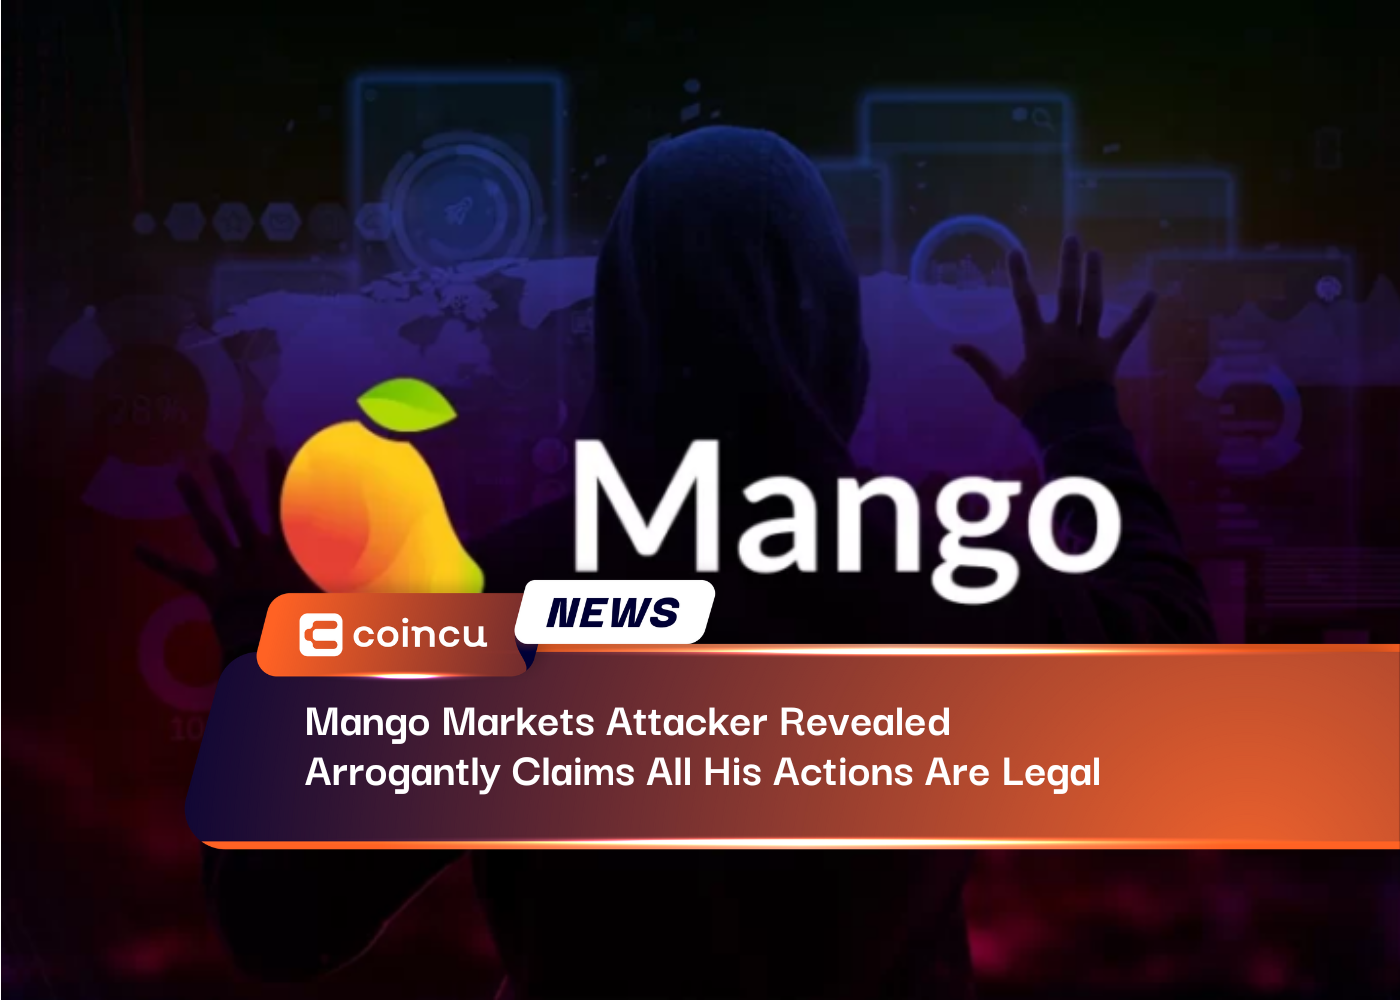 Mango Markets Attacker Revealed, Arrogantly Claims All His Actions Are Legal